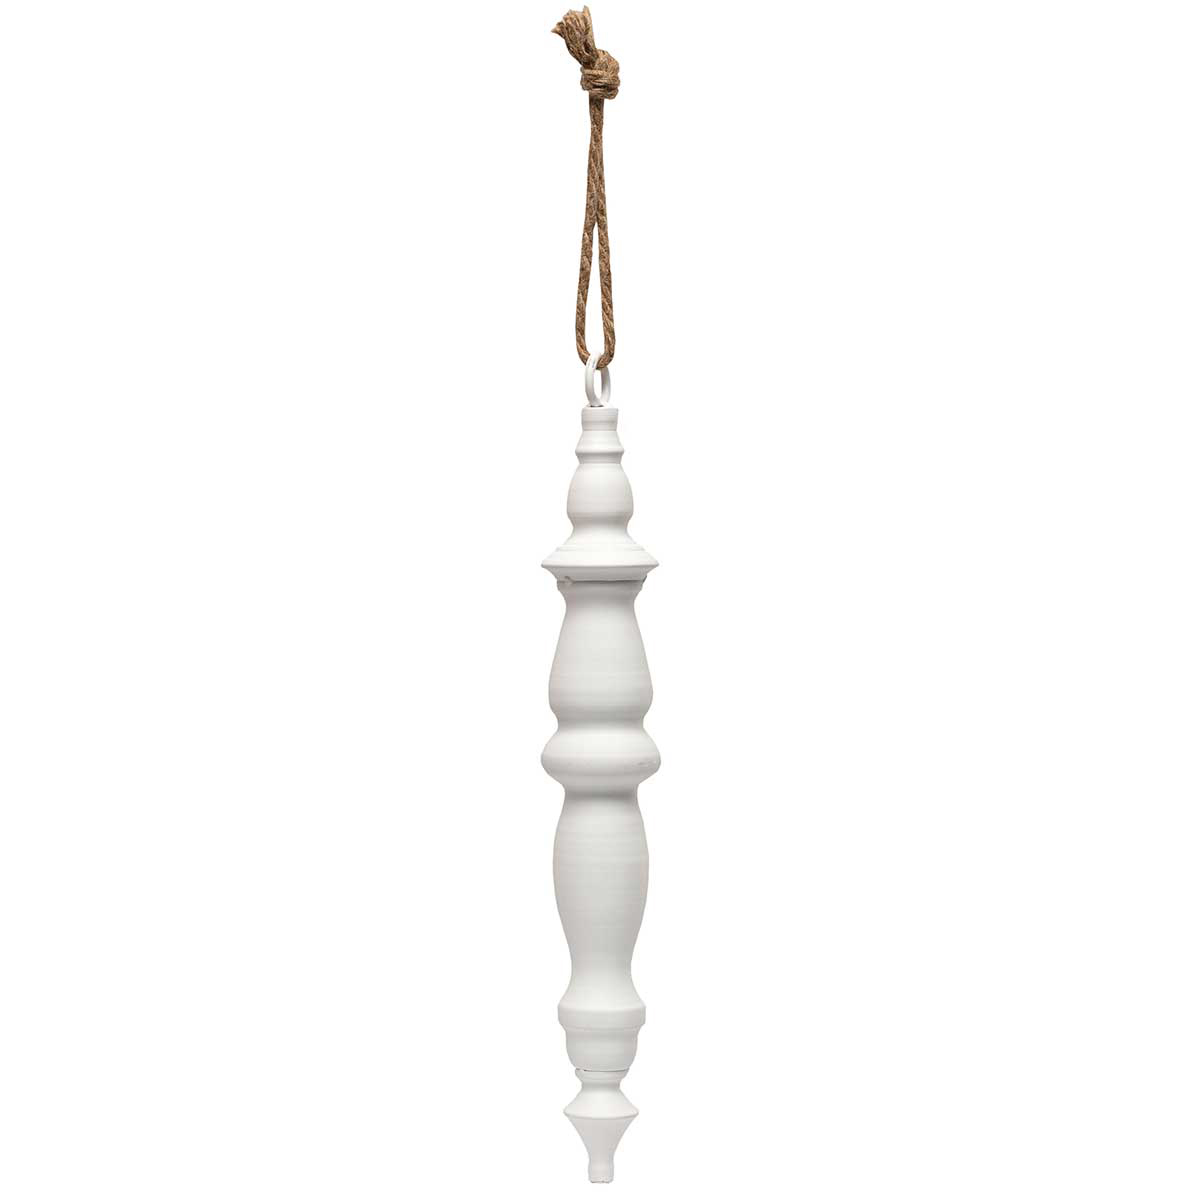 ORNAMENT FINIAL MATTE WHITE LARGE 2.5IN X 16IN METAL